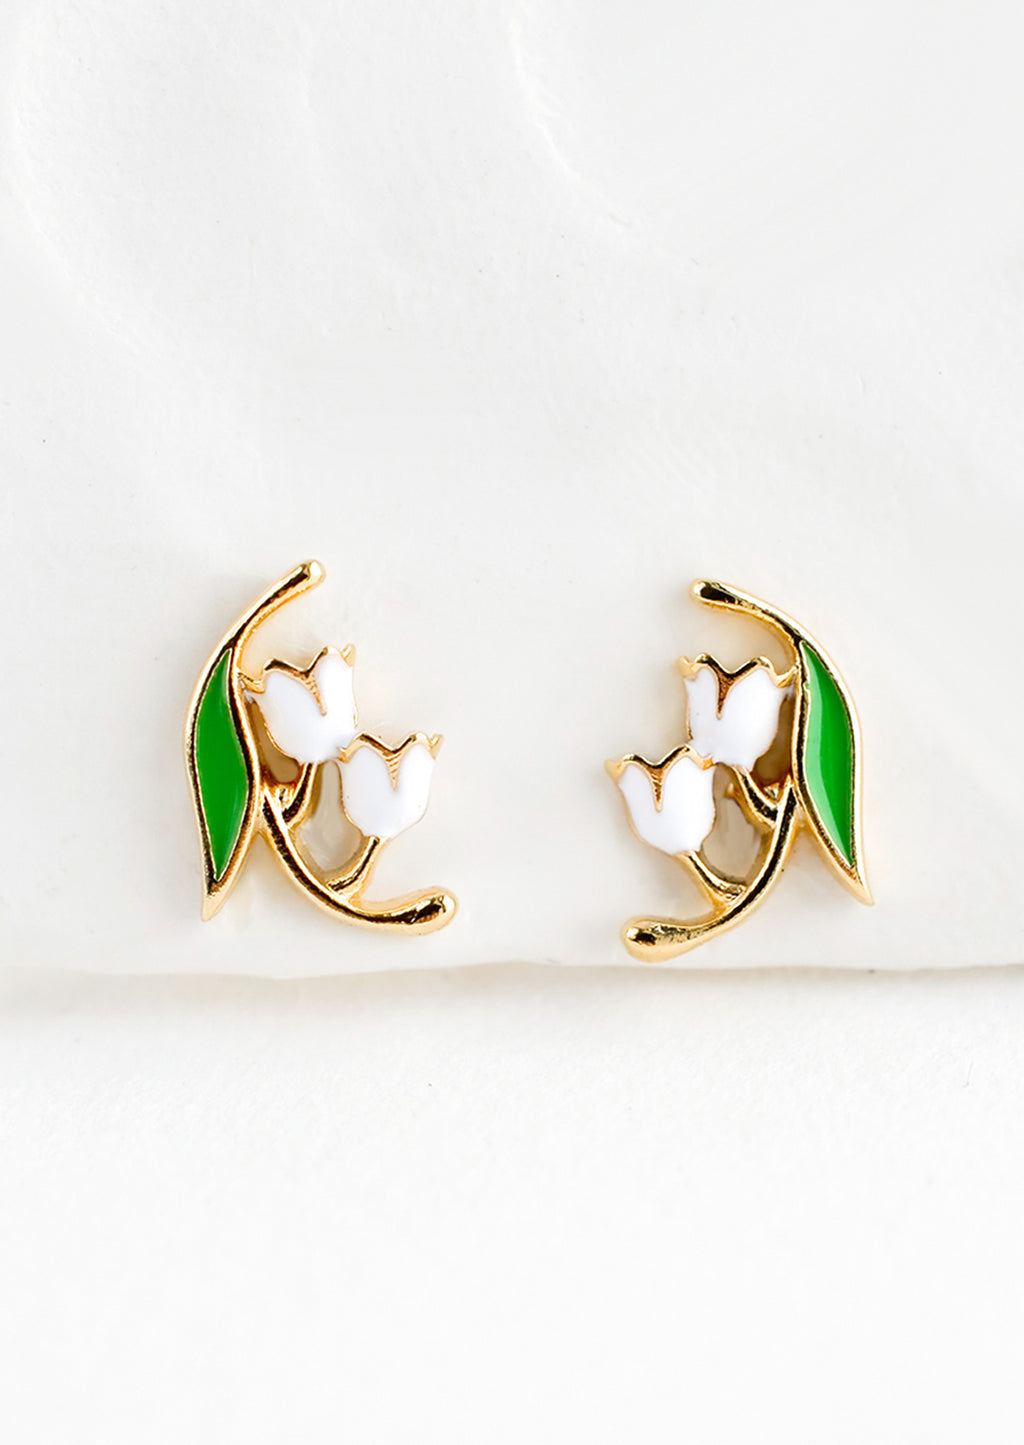 1: Small gold stud earrings in the shape of a lily of the valley flower, constructed in green and white enamel finish.